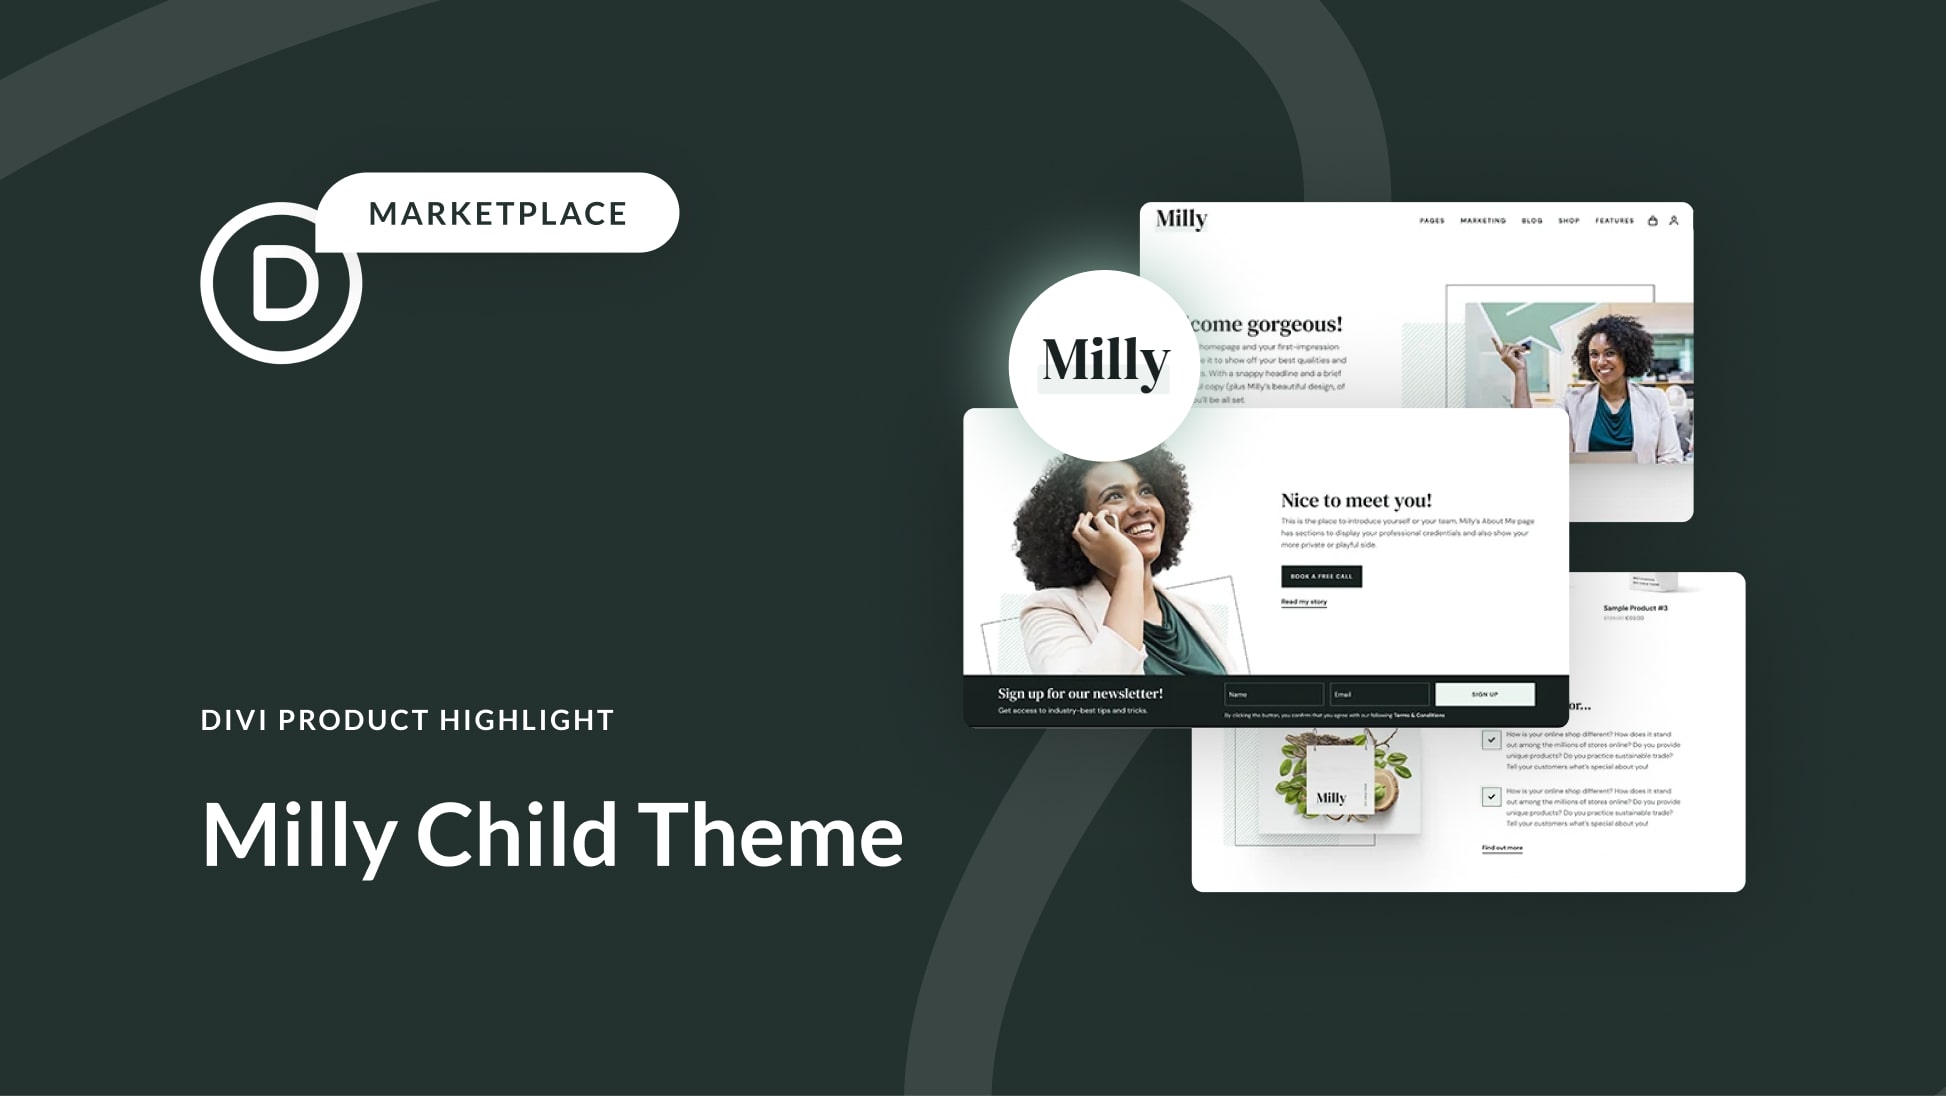 Divi Product Highlight: Milly Child Theme